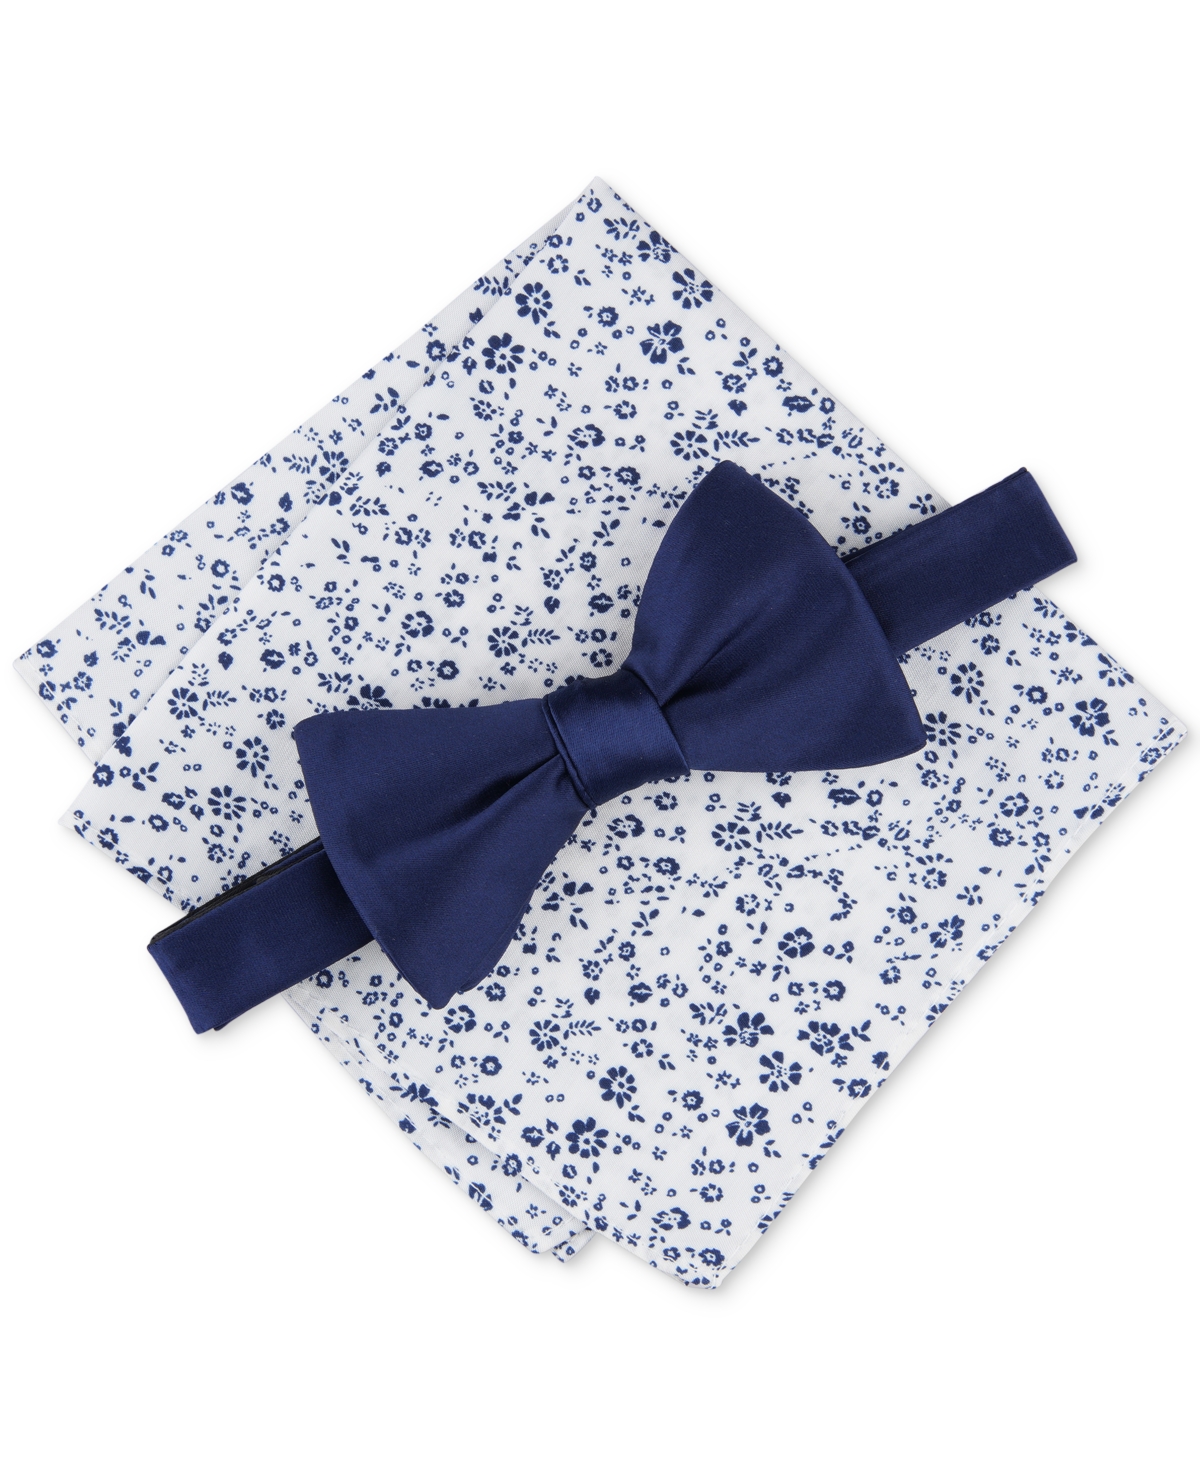 Men's Logan Solid Bow Tie & Floral Pocket Square Set, Created for Macy's - Dark Navy